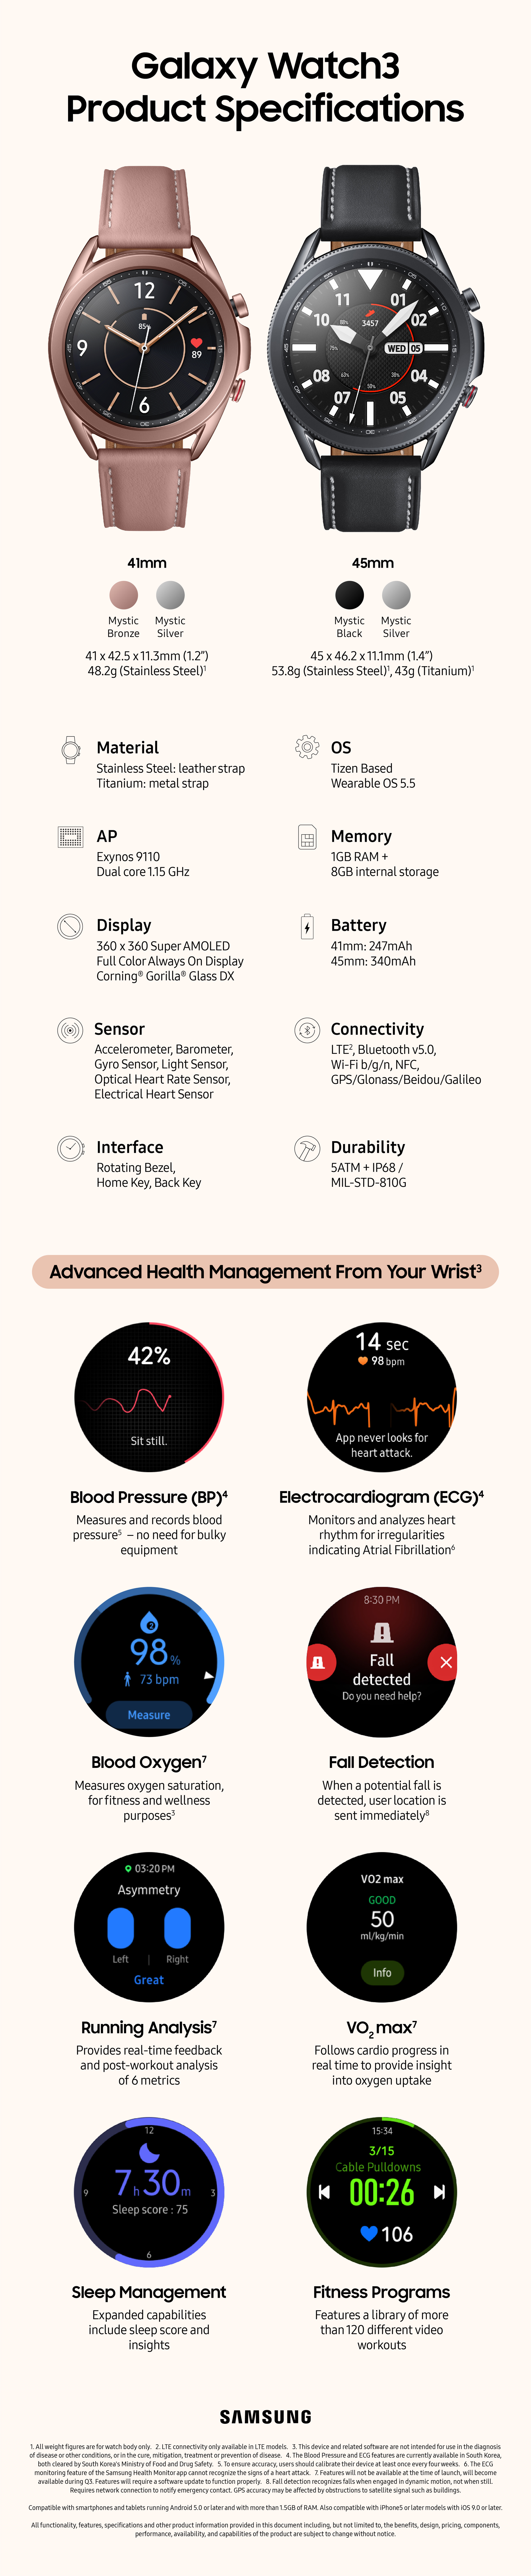 Galaxy Watch3 infographic highlighting the health management tools and functions of the new Galaxy wearable.